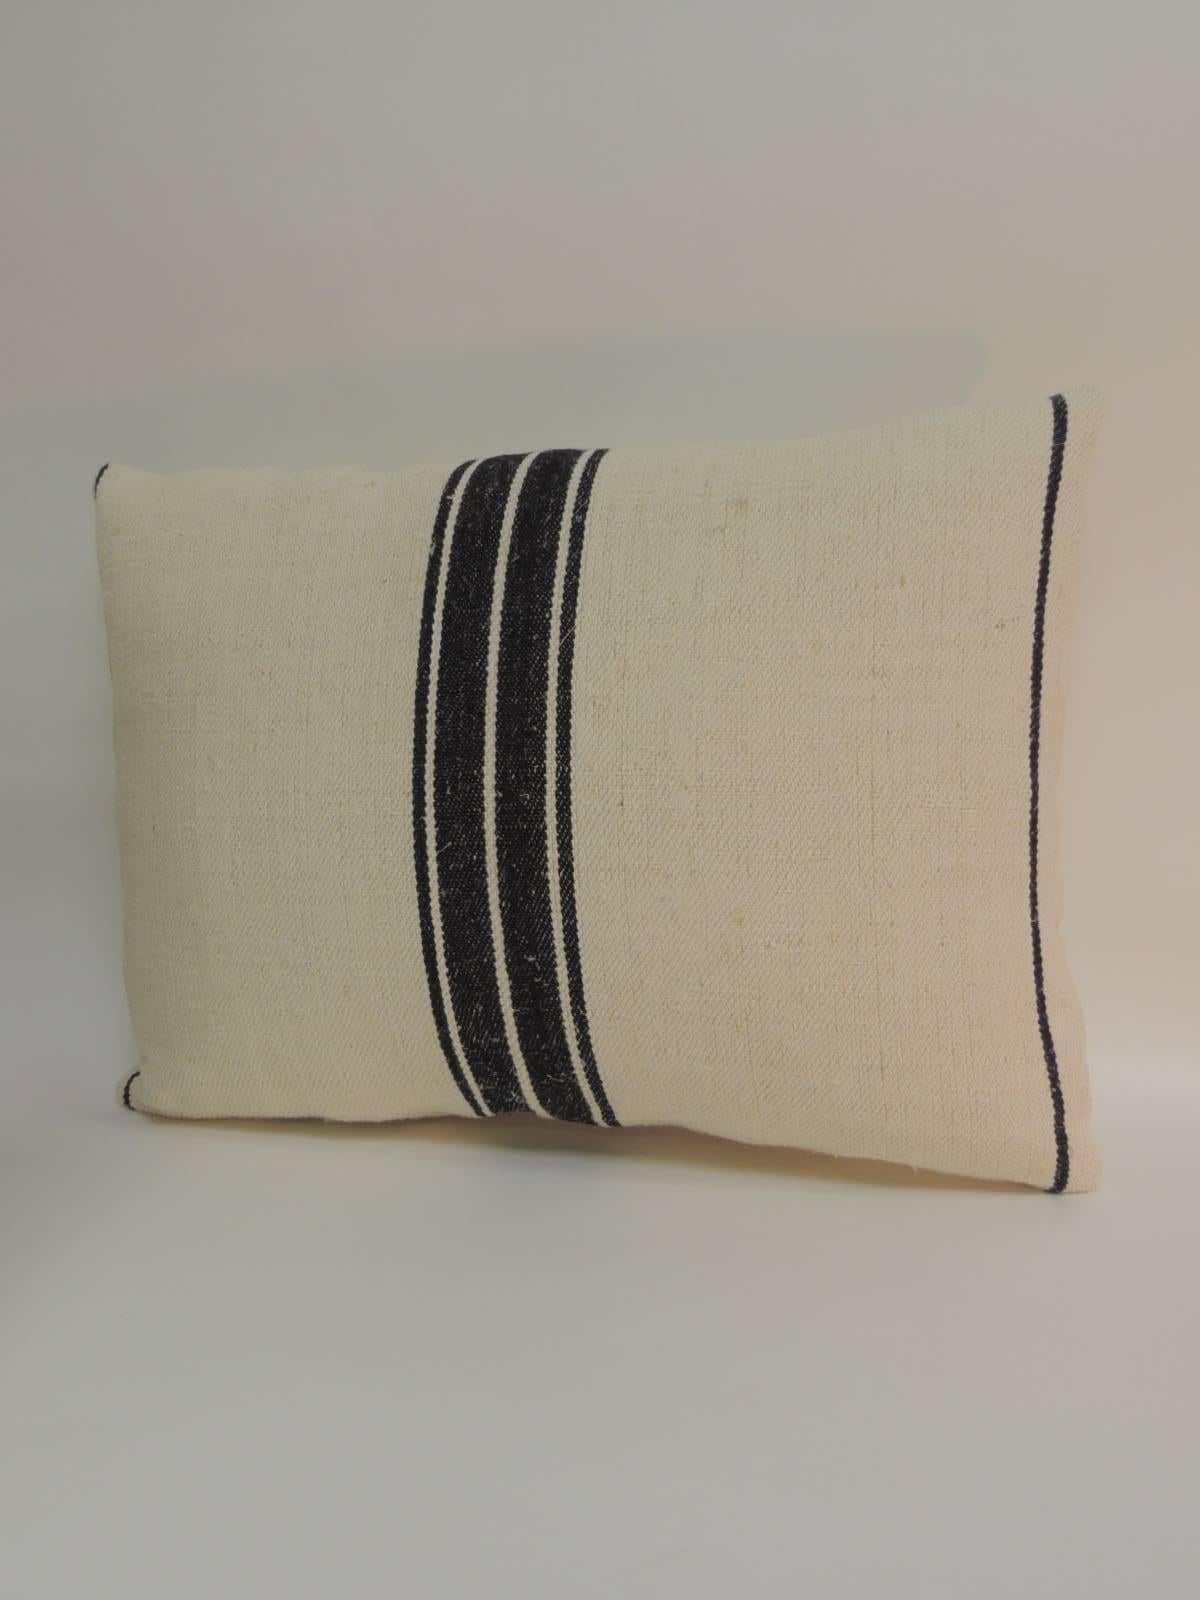 Pair of 19th century French stripes lumbar decorative pillows in natural and black. Decorative pillows textile show vertical stripes on tan with a woven homespun textile. French decorative cushions finalized with natural linen backings. Throw